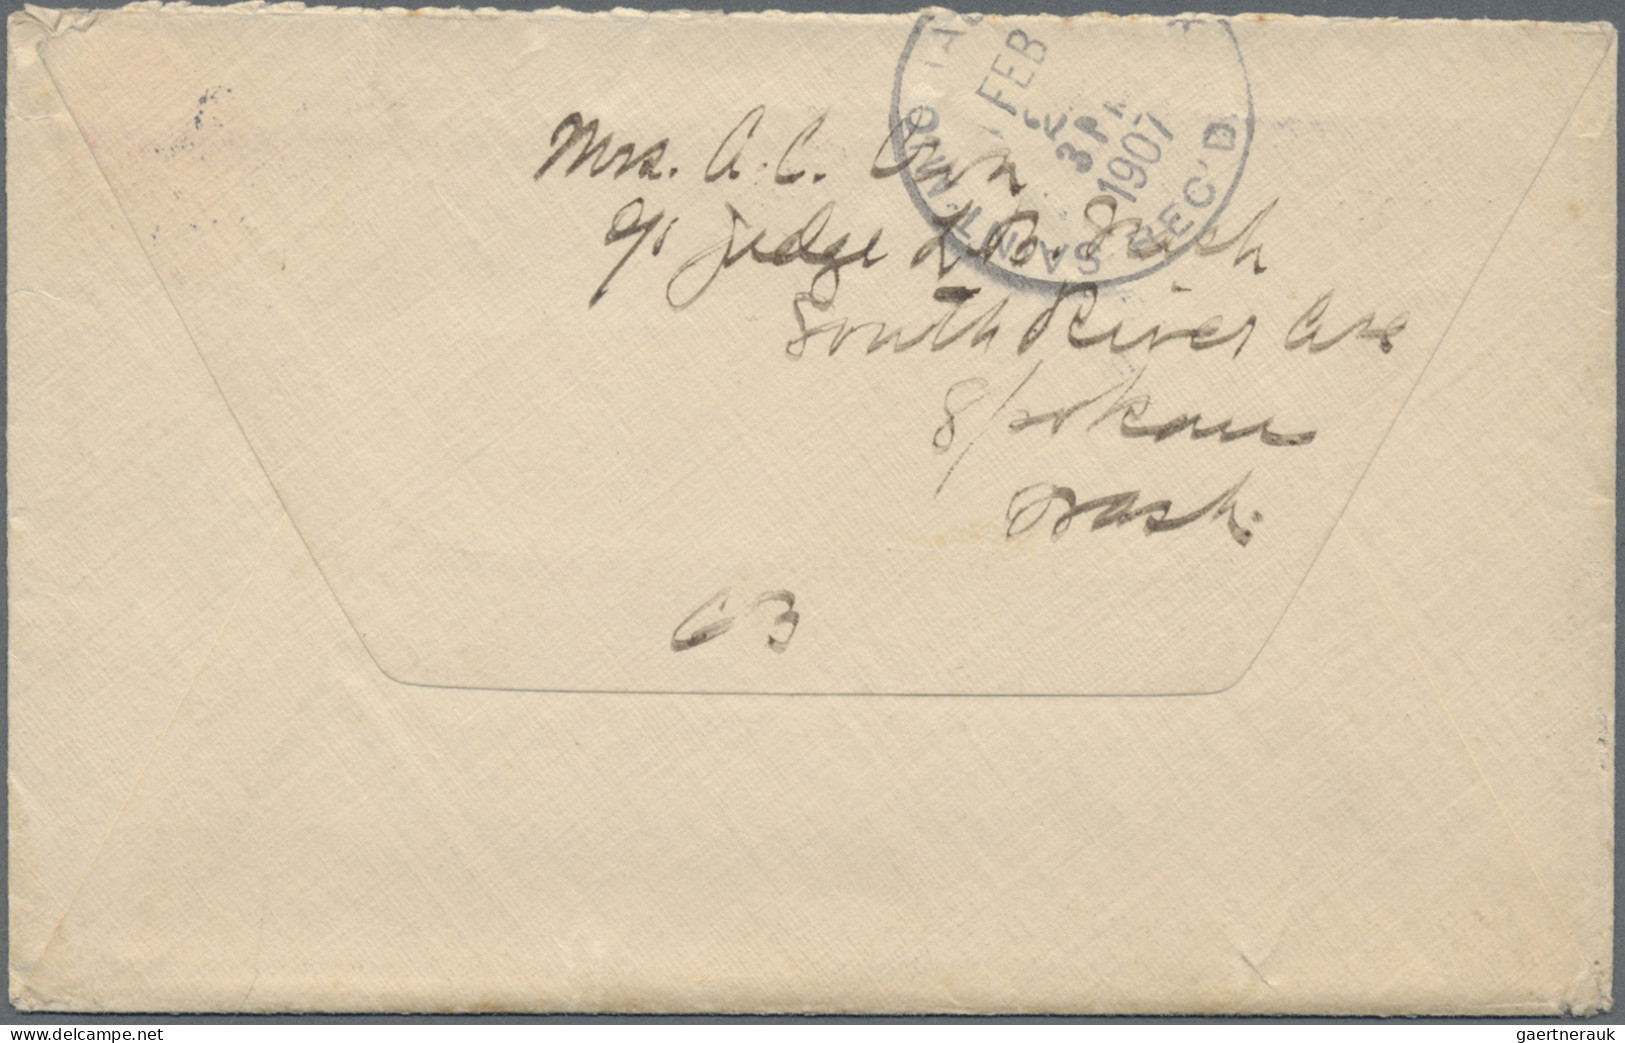 Thematics: Arctic: 1907, Alaska Winter Mail, Group Of Six Covers Sent From A Mis - Other